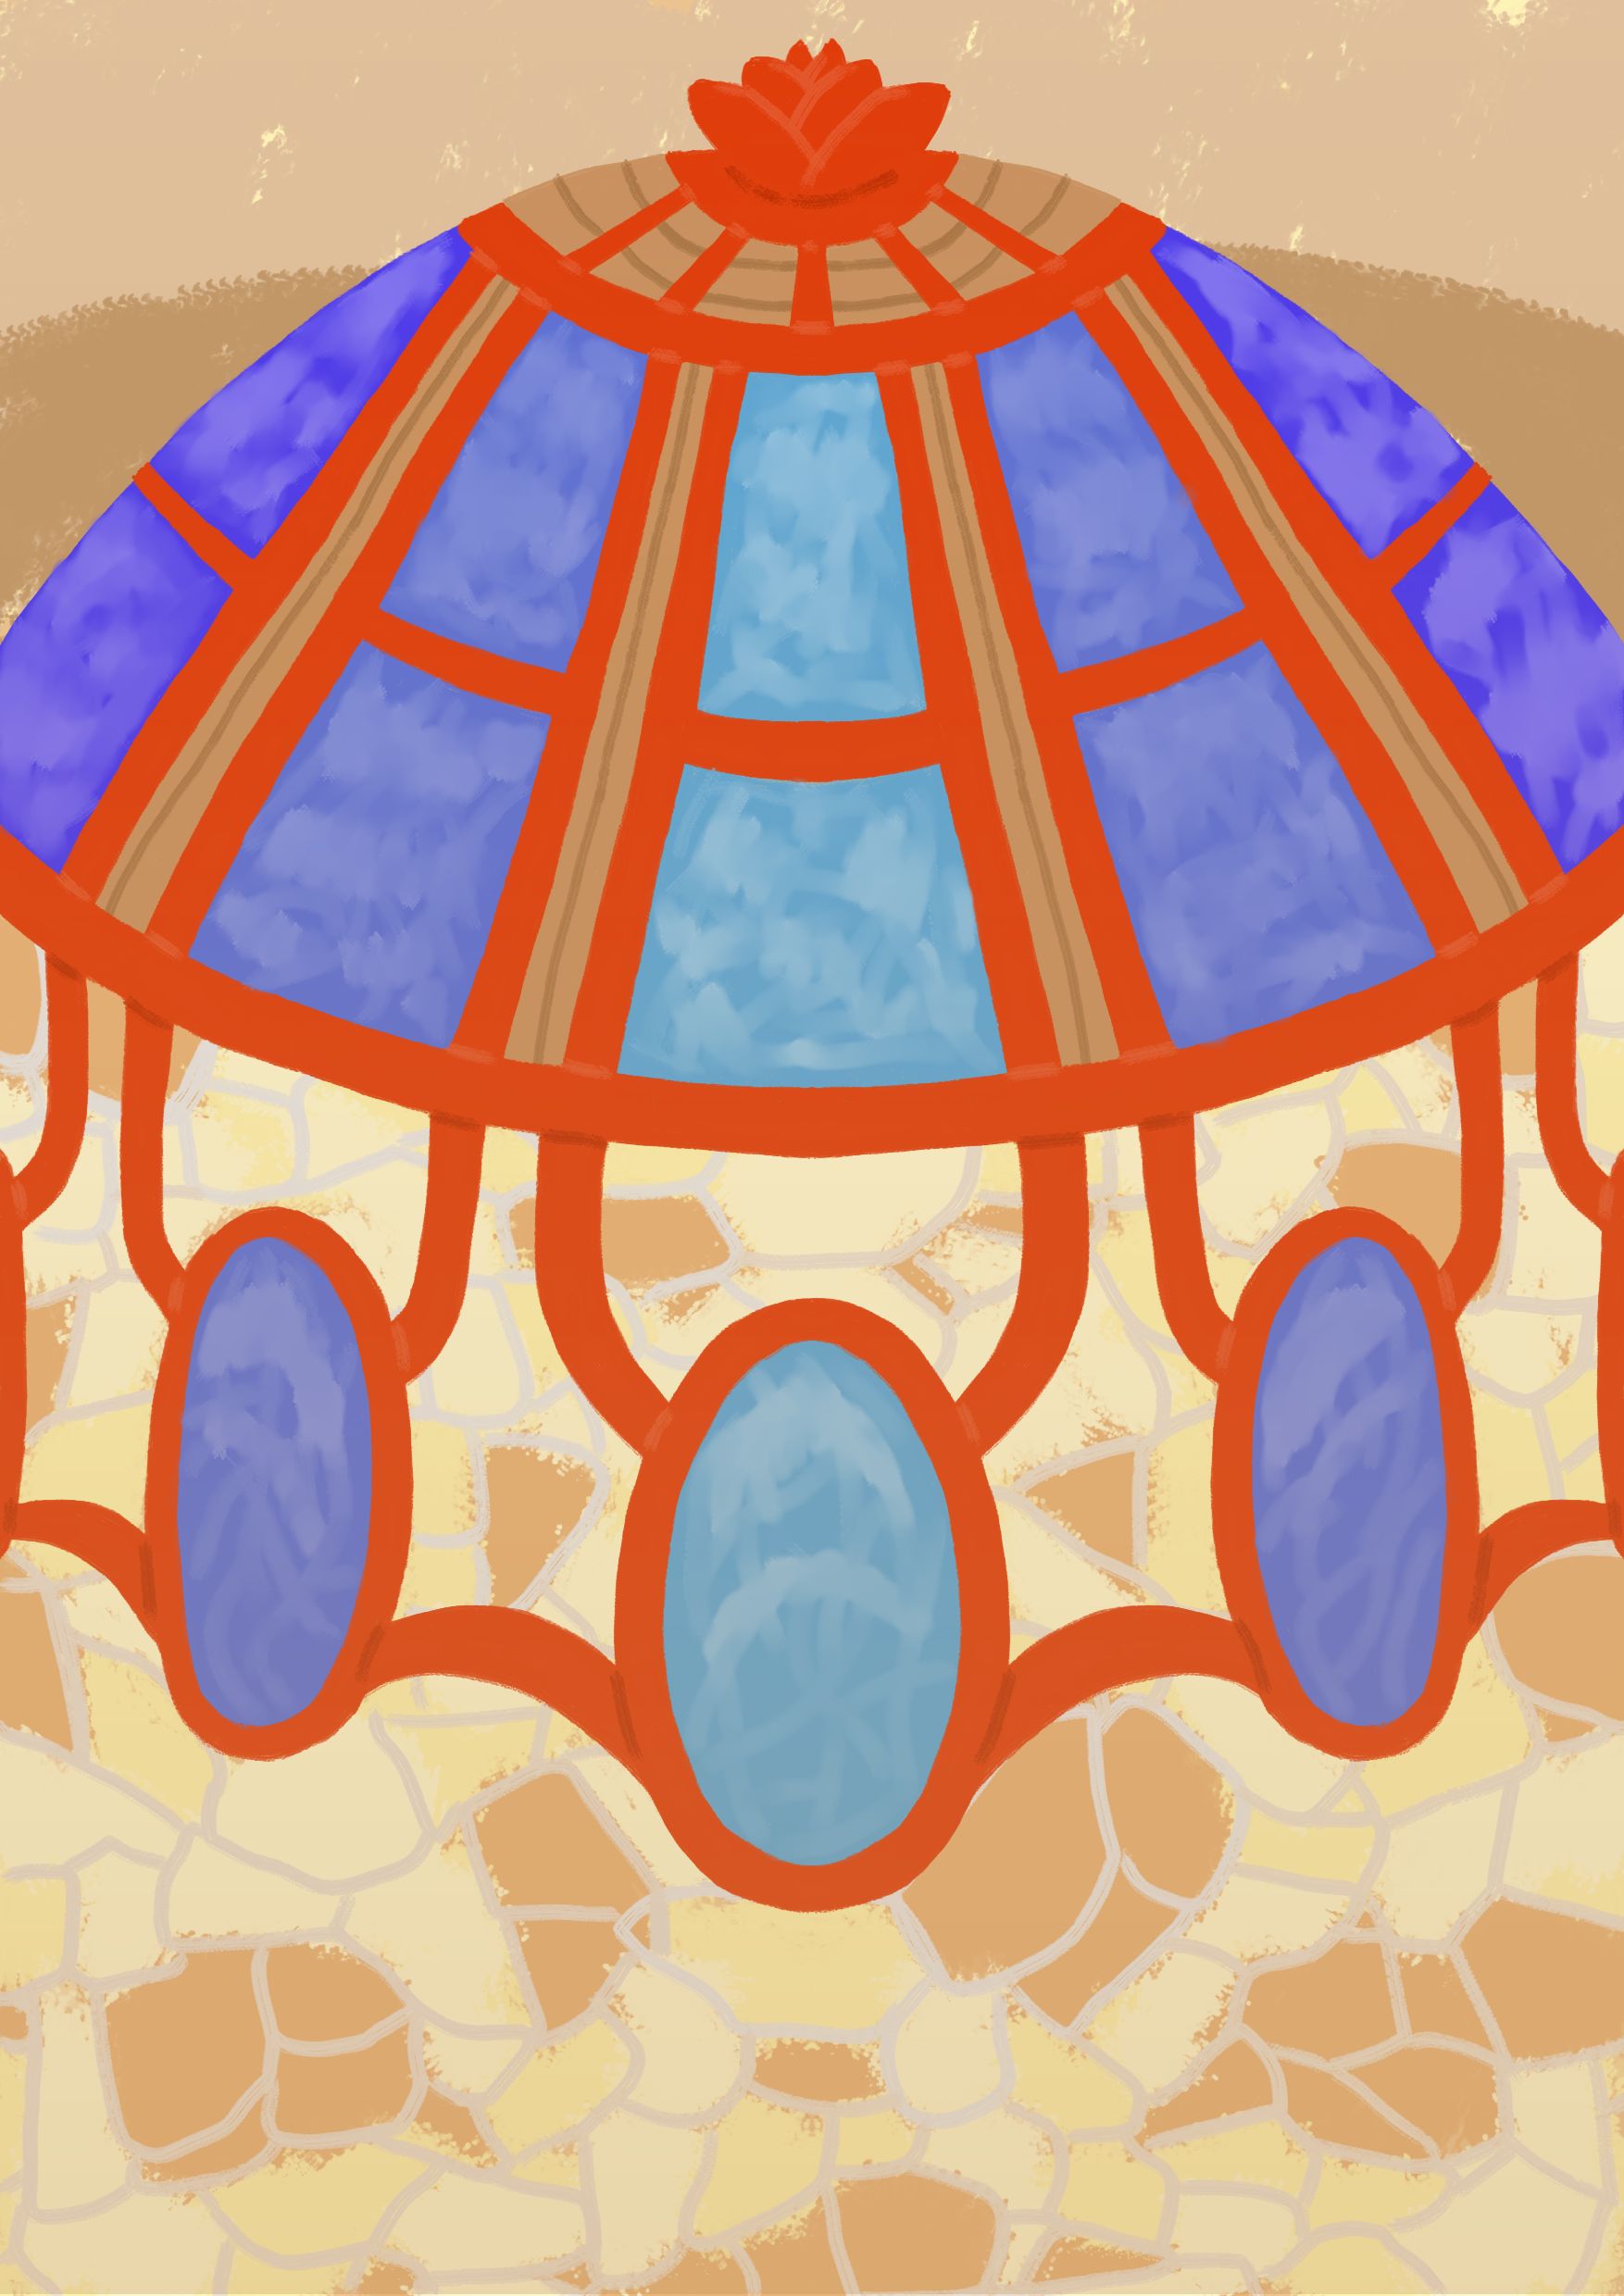 A drawing of a curved roof with quartz windows in it and round quartz windows below it, rimmed in copper.